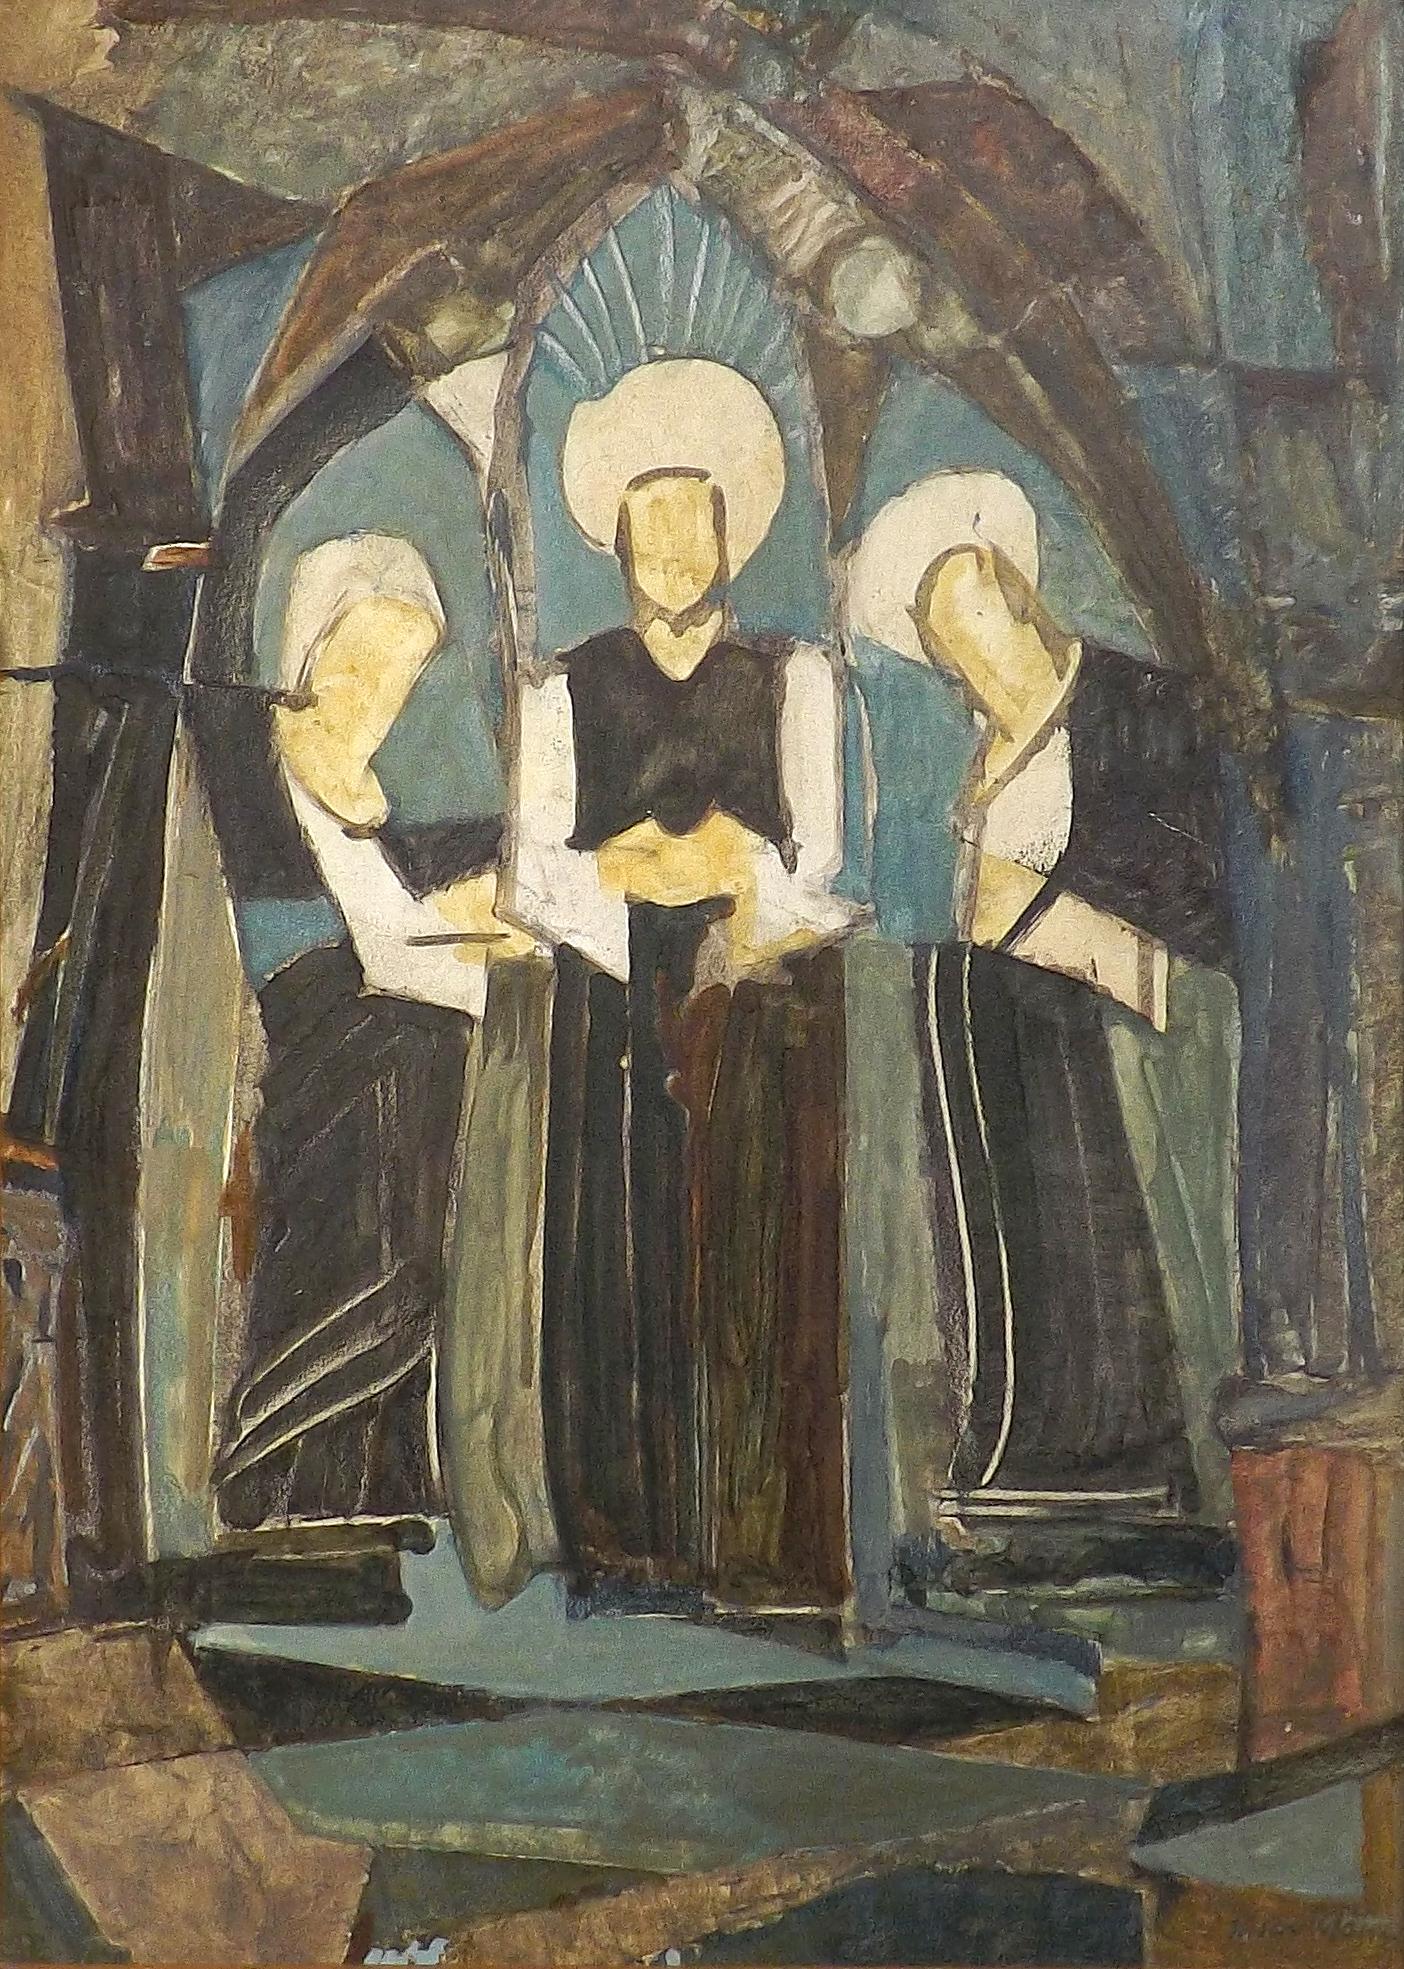 '3 Heilige' ('The Three Holies), a painting of three holy figures dated 1973 by Hugo Mohl. Born in 1893 in Dusseldorf, Germany and graduated from the Academy of Fine Arts in Berlin. Began his professional career as a traditional representational